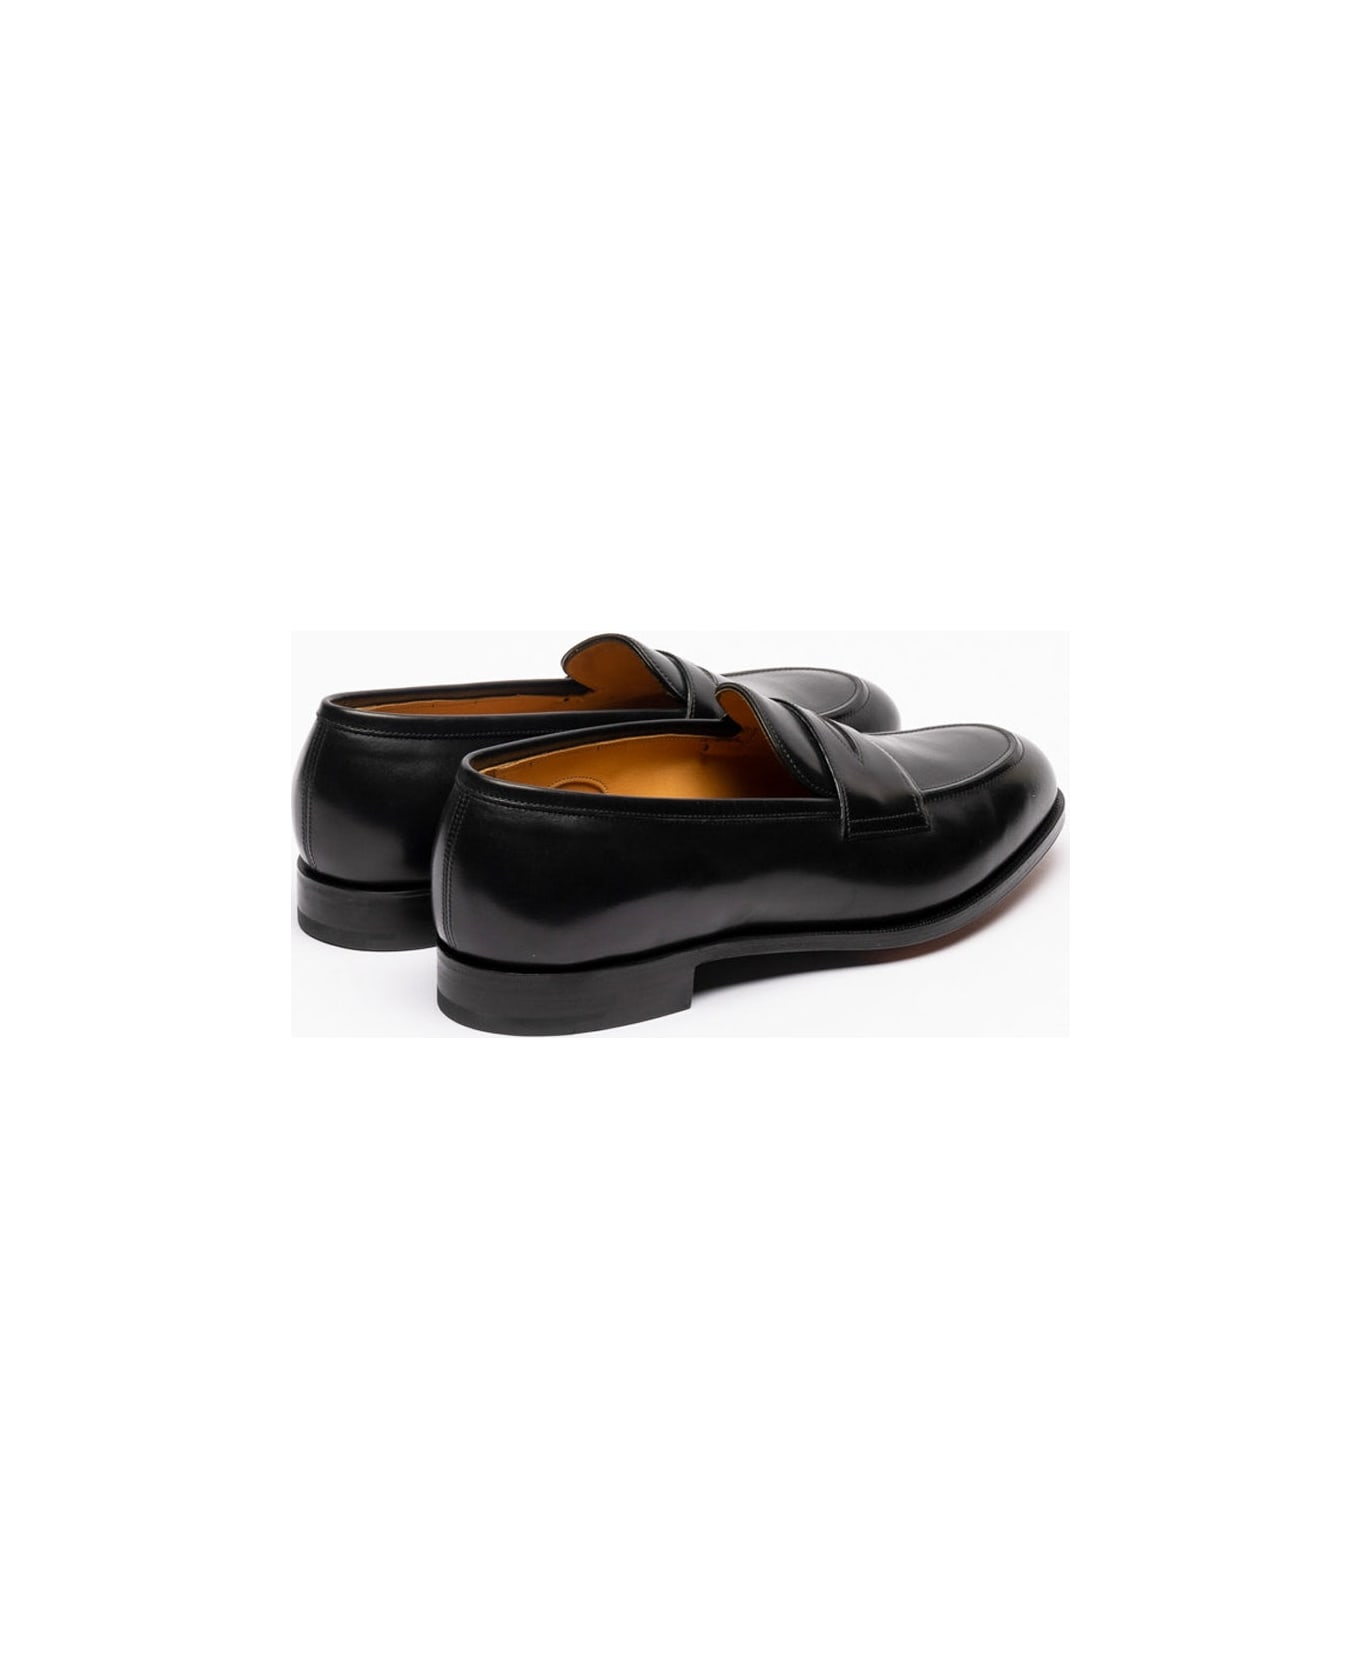 Edward Green Piccadilly Black Calf Penny Loafer - Nero